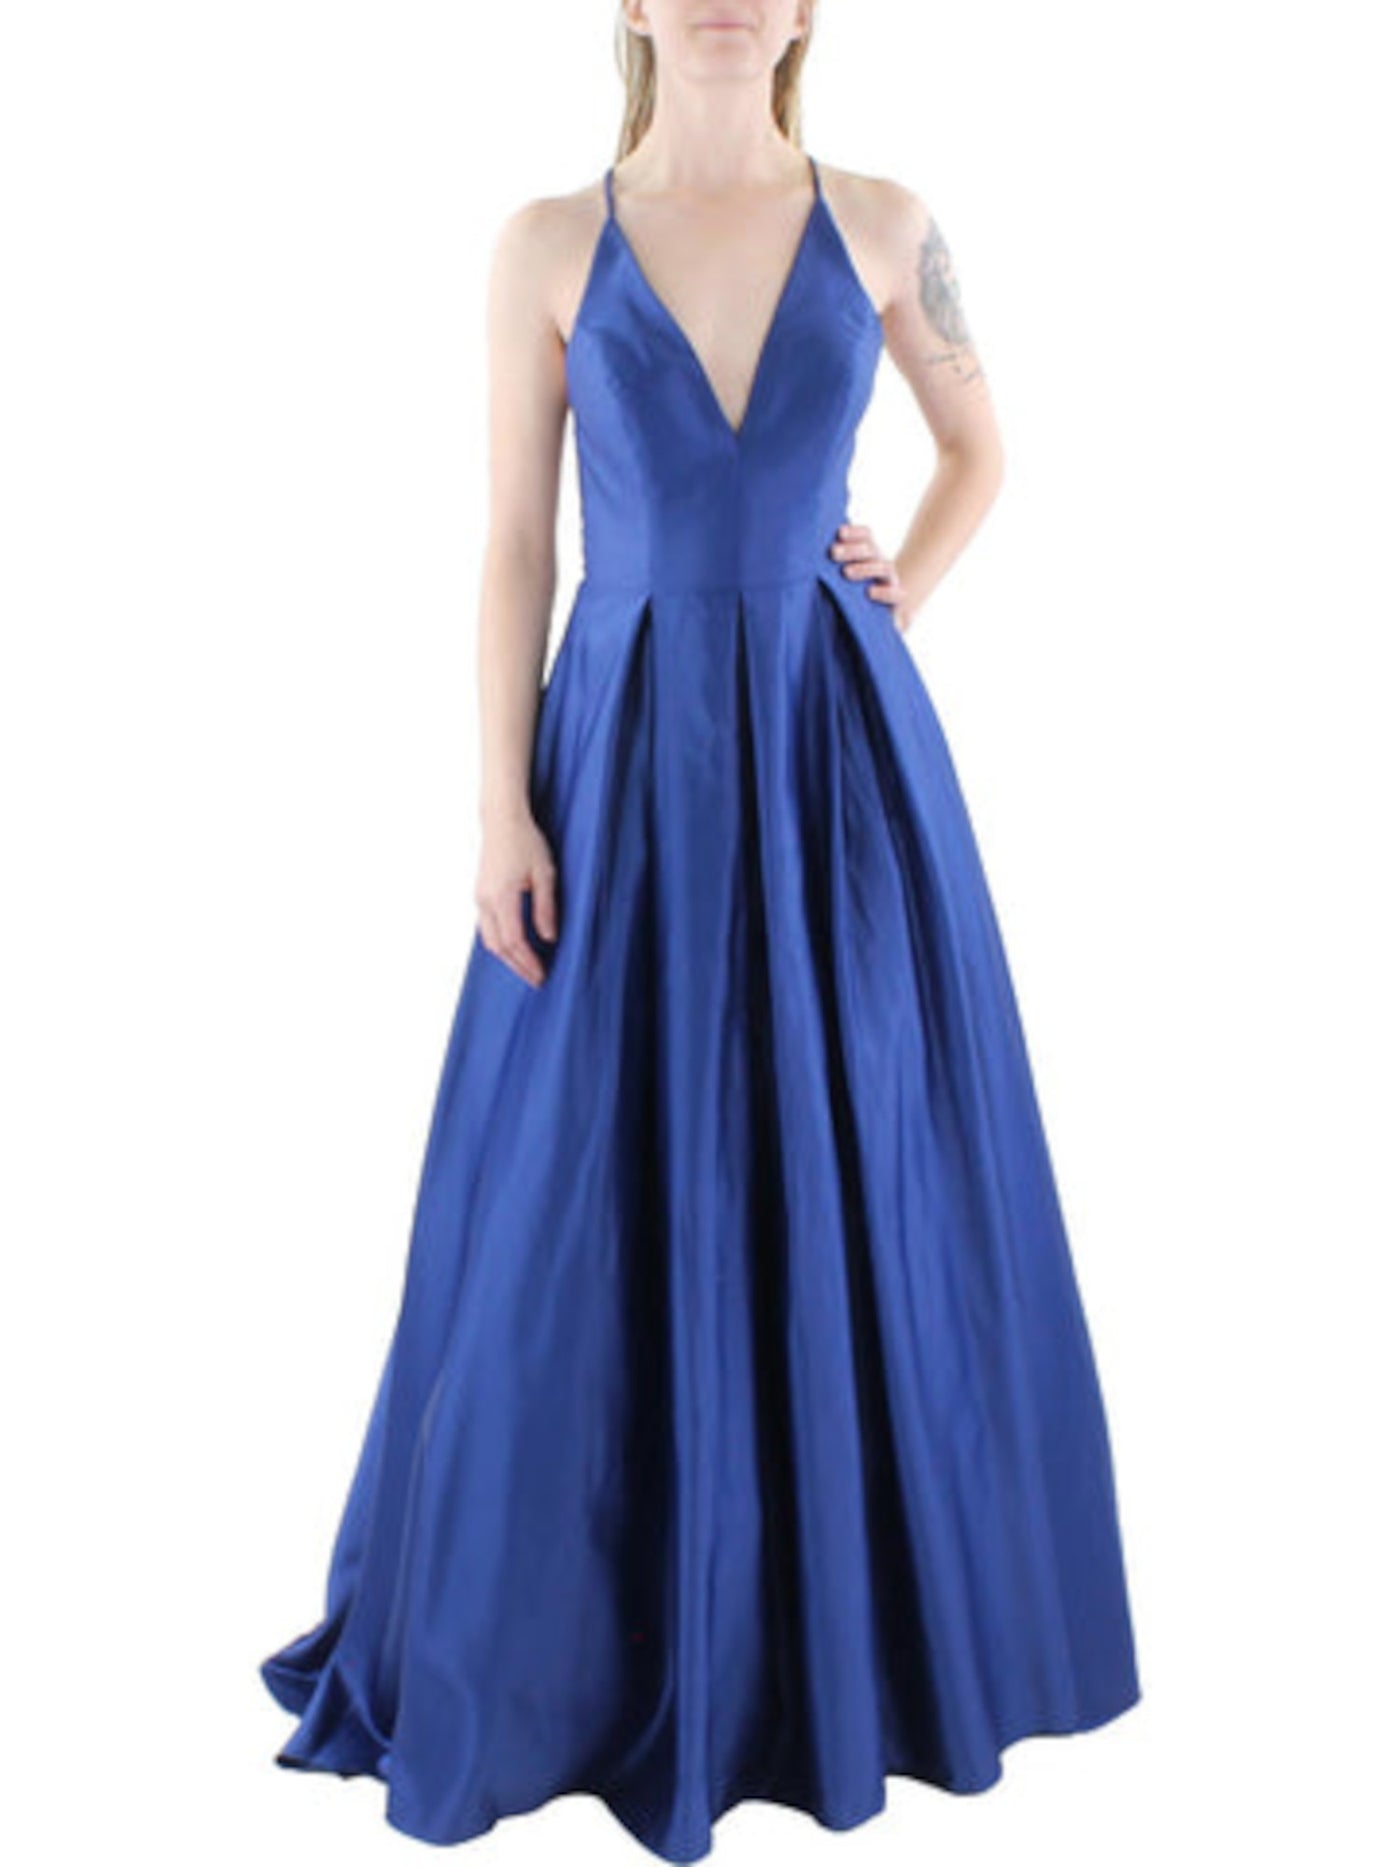 BLONDIE NITES Womens Blue Zippered Pocketed Illusion Strappy Back Bodice Spaghetti Strap V Neck Full-Length Evening Gown Dress Juniors 3